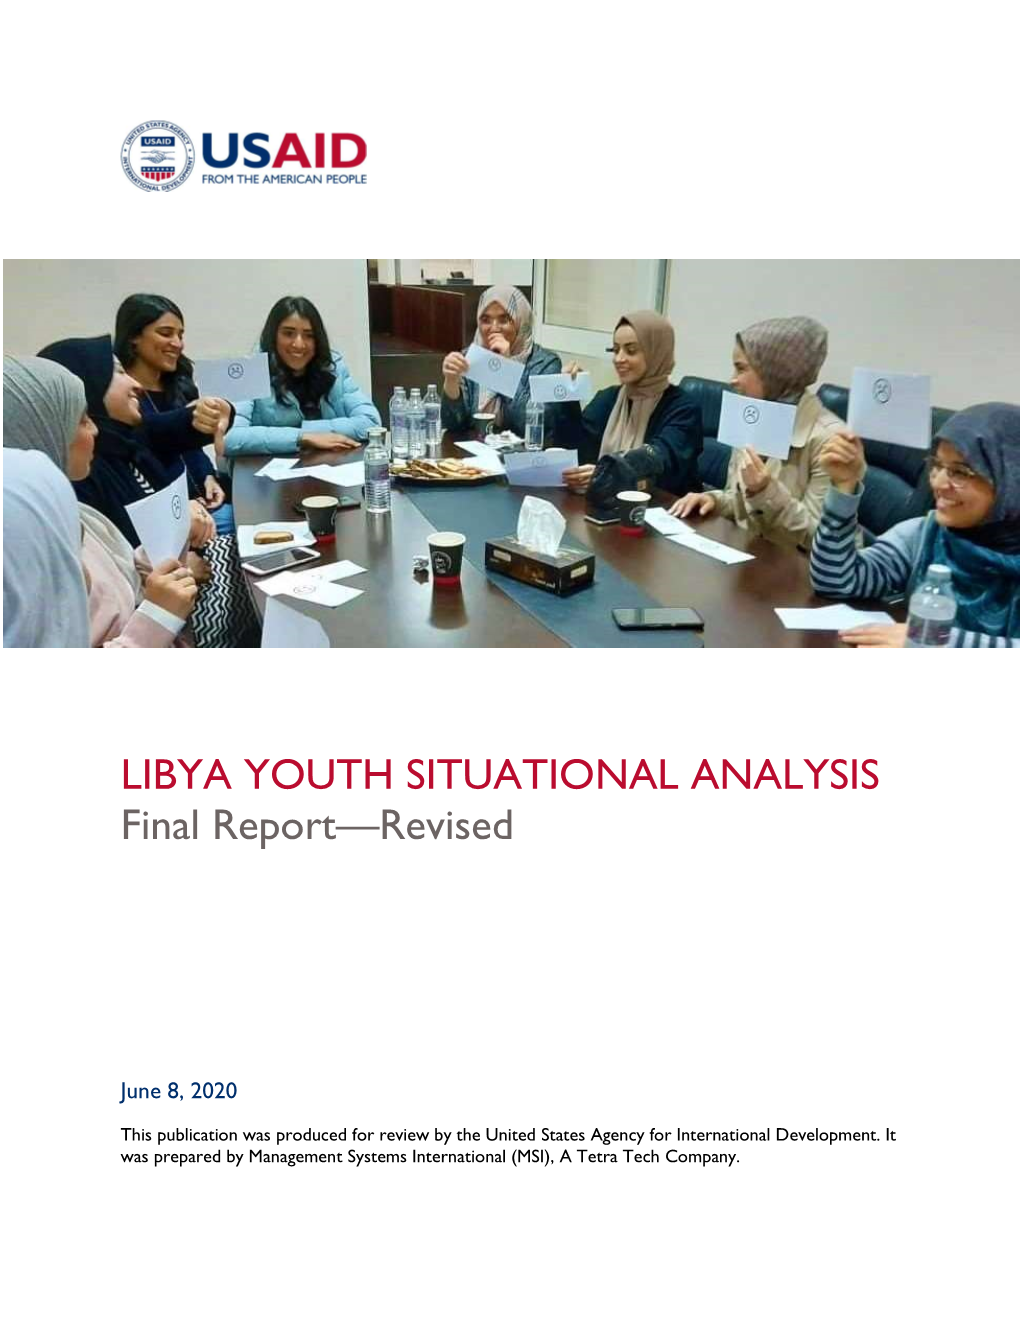 LIBYA YOUTH SITUATIONAL ANALYSIS Final Report—Revised